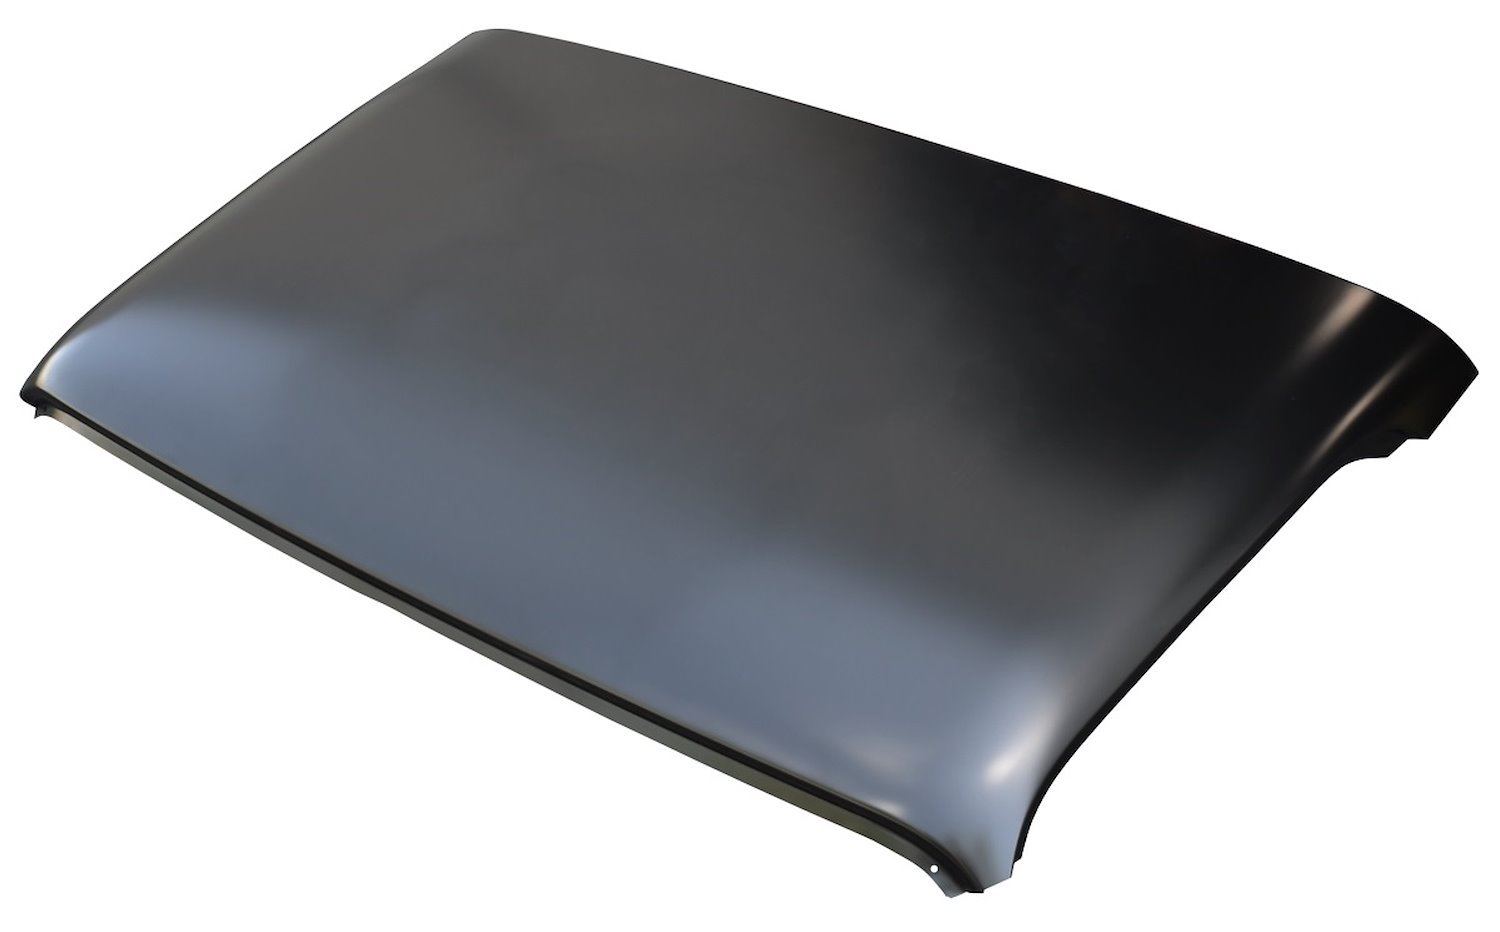 0850-112 Outer Roof Skin w/o Roof Light Holes for 1973-1987 GM C/K Standard Cab Pickup Trucks [3999814]